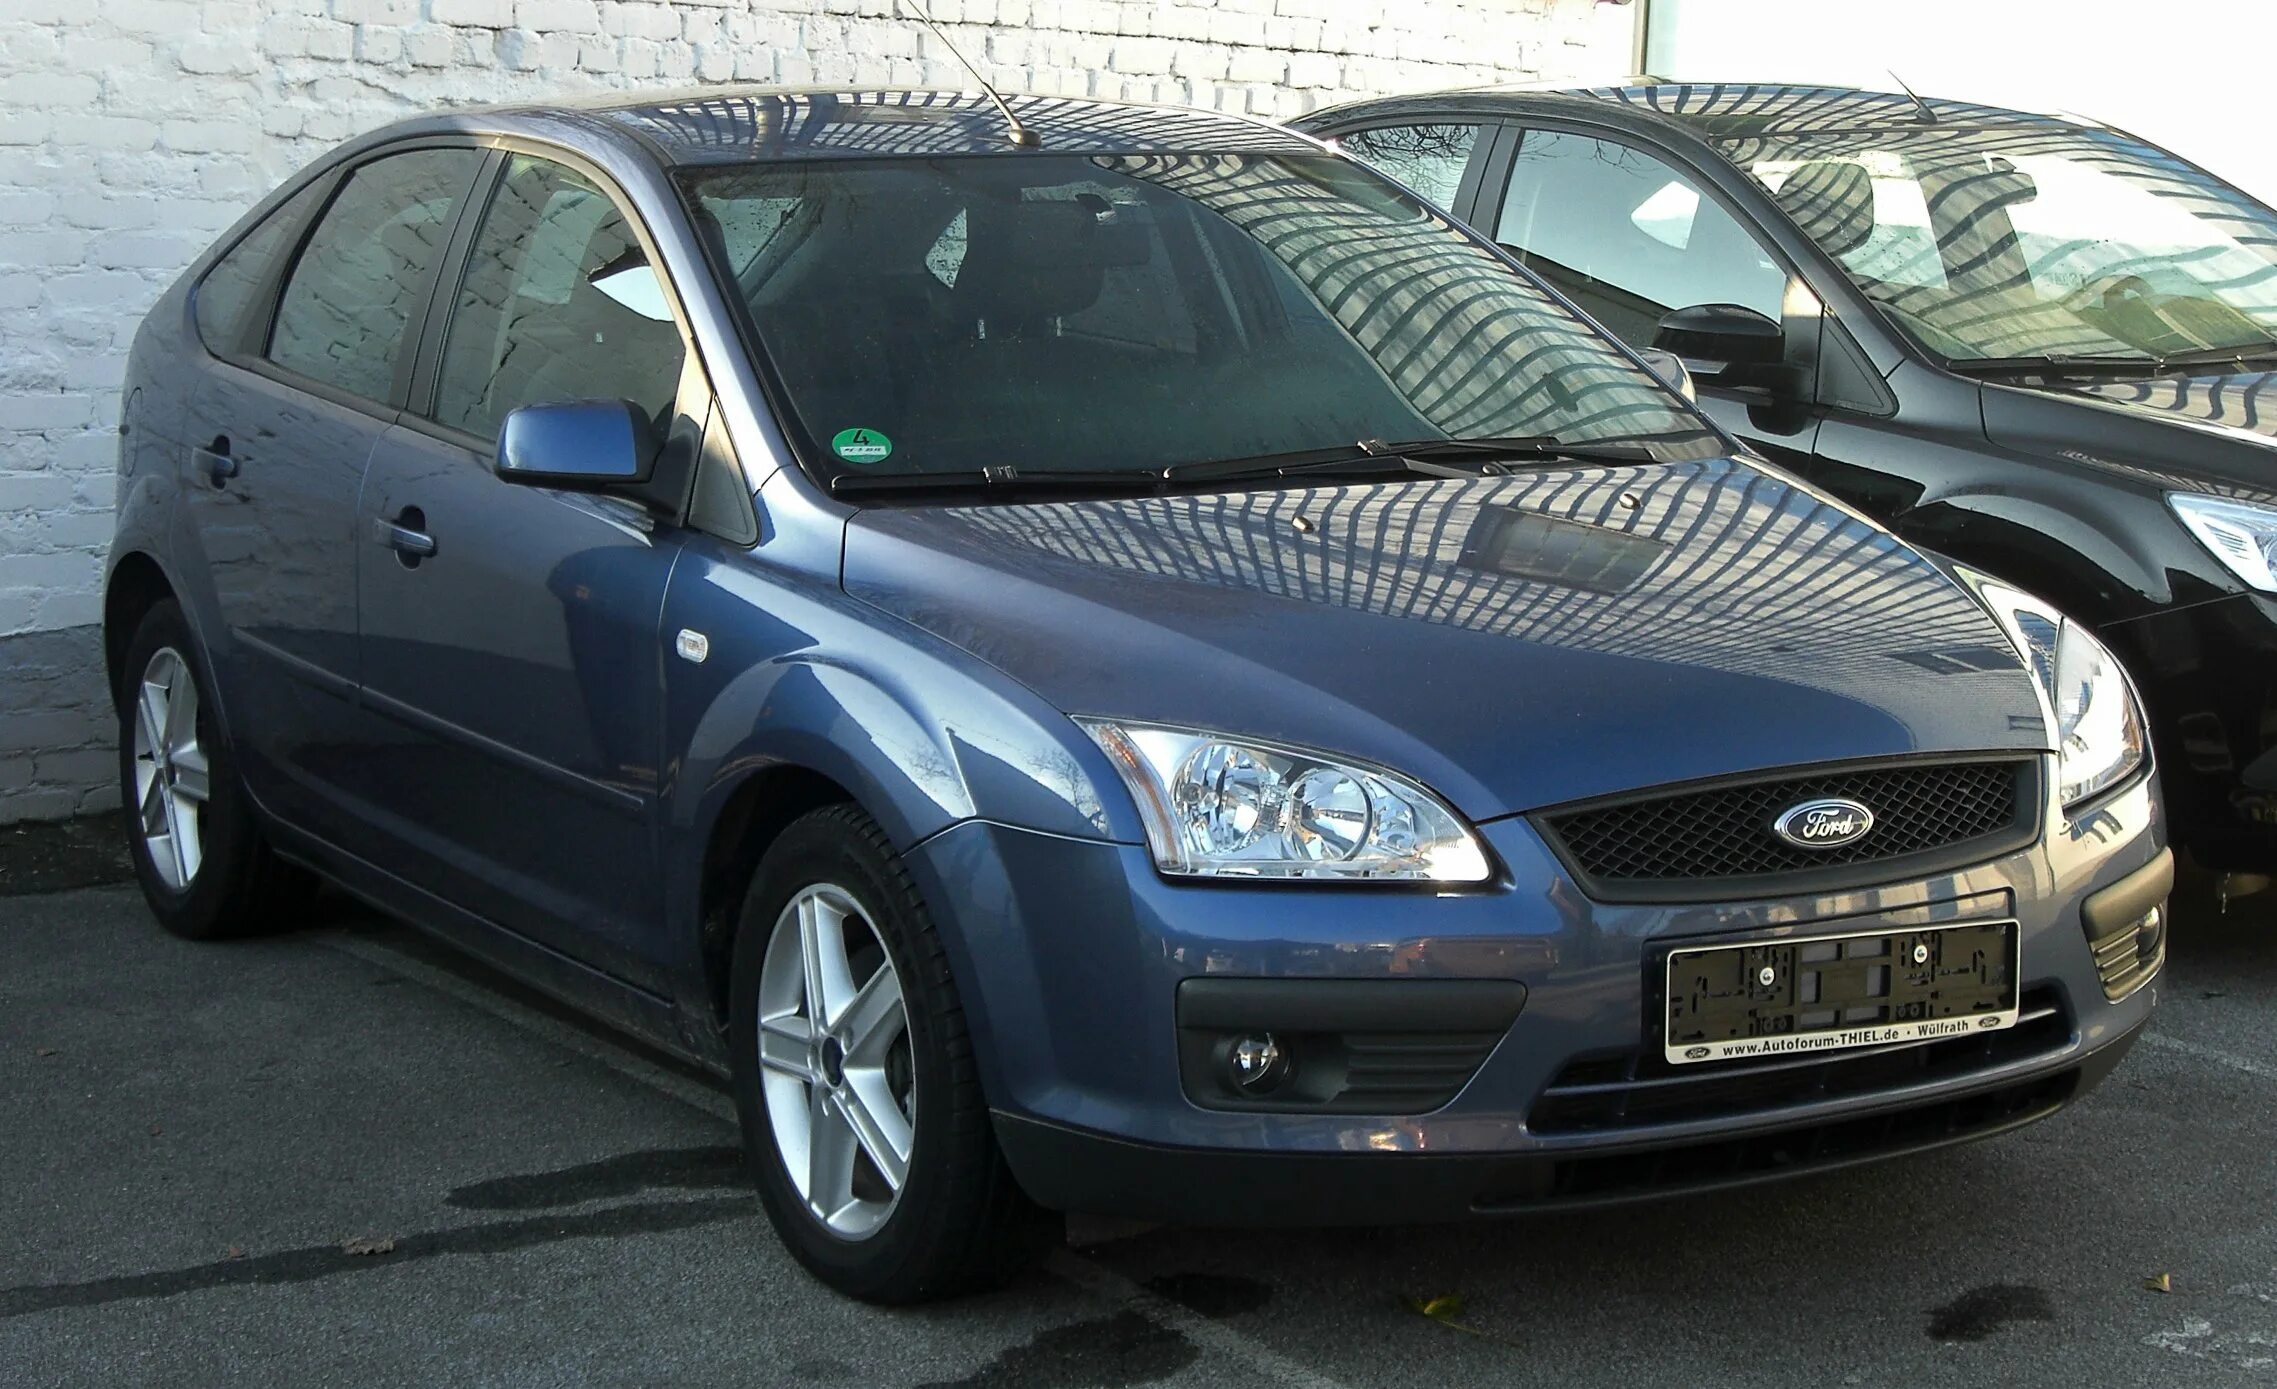 Ford Focus, II, 2005 — 2008, седан. Ford Focus 2 дорестайлинг. Ford Focus 2 дорест. Ford Focus 2 дорестайл. Форд фокус 2 хэтчбек 2.0